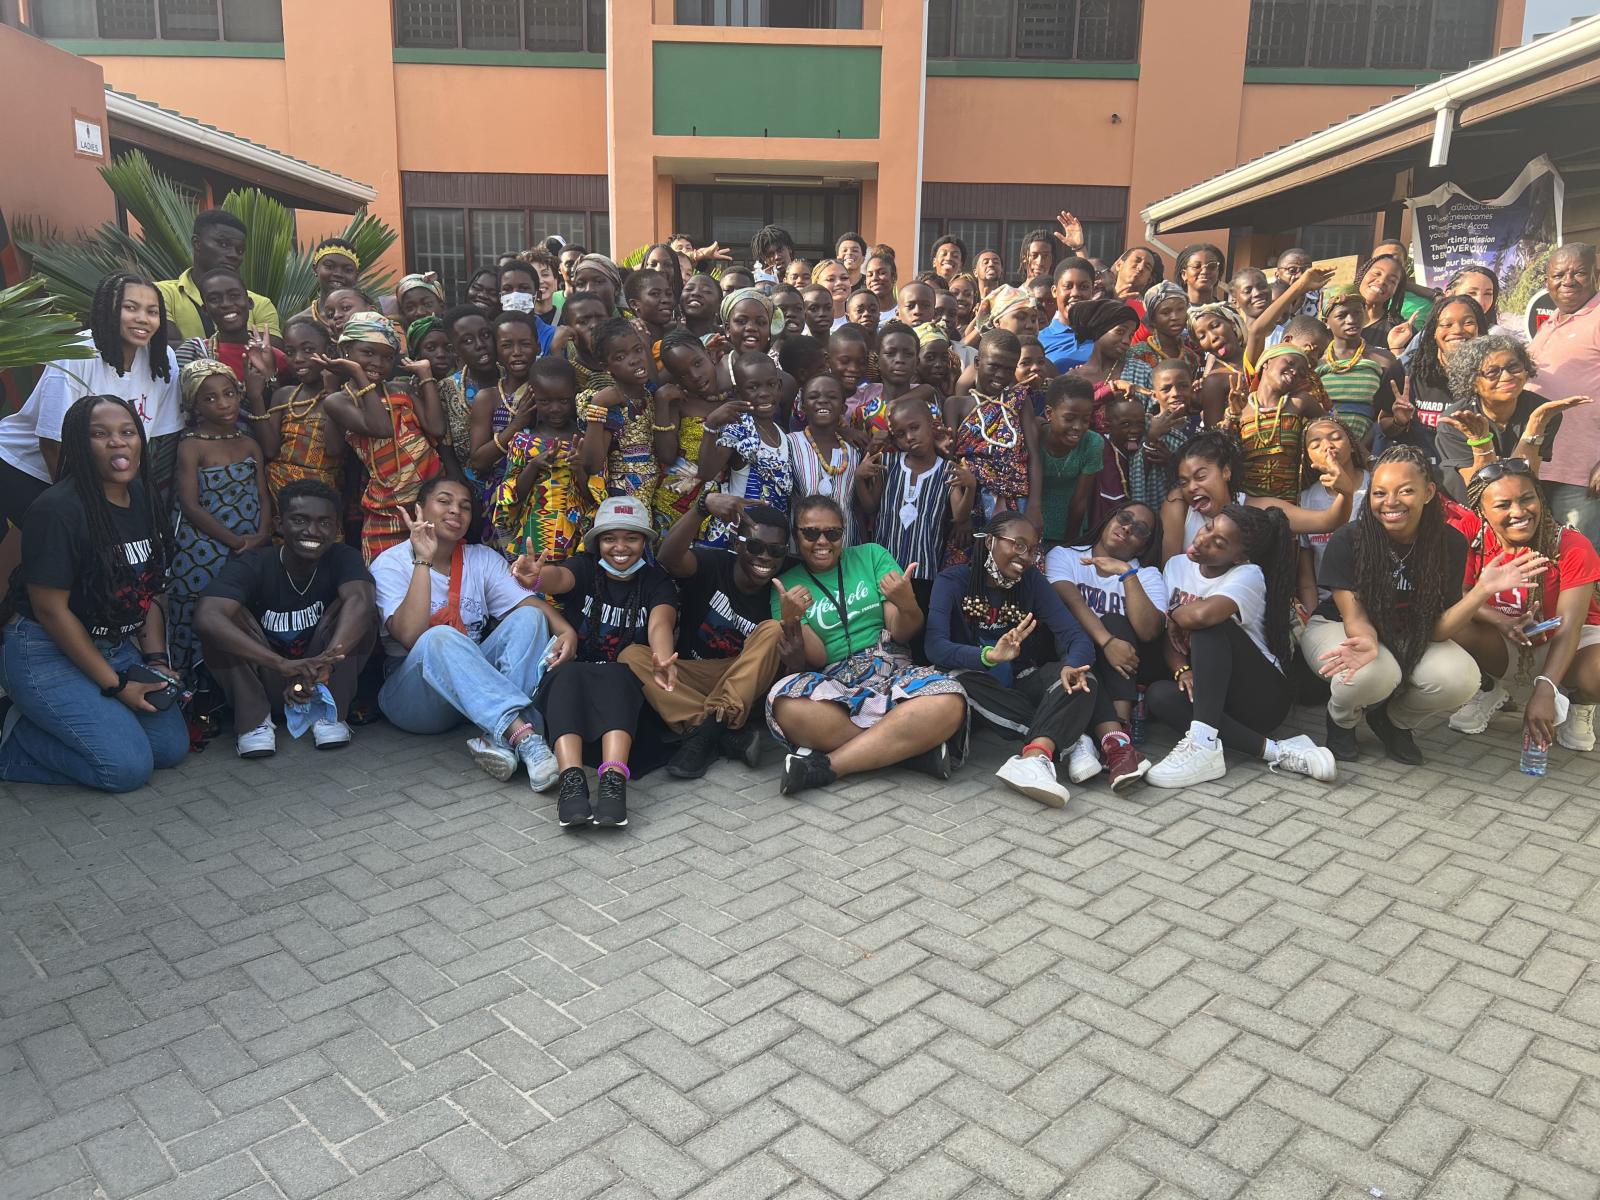 Howard University Alternative Spring Break Ghana student group poses with their Accra students at the Kwame Nkrumah Memorial School and Achimota Senior High School